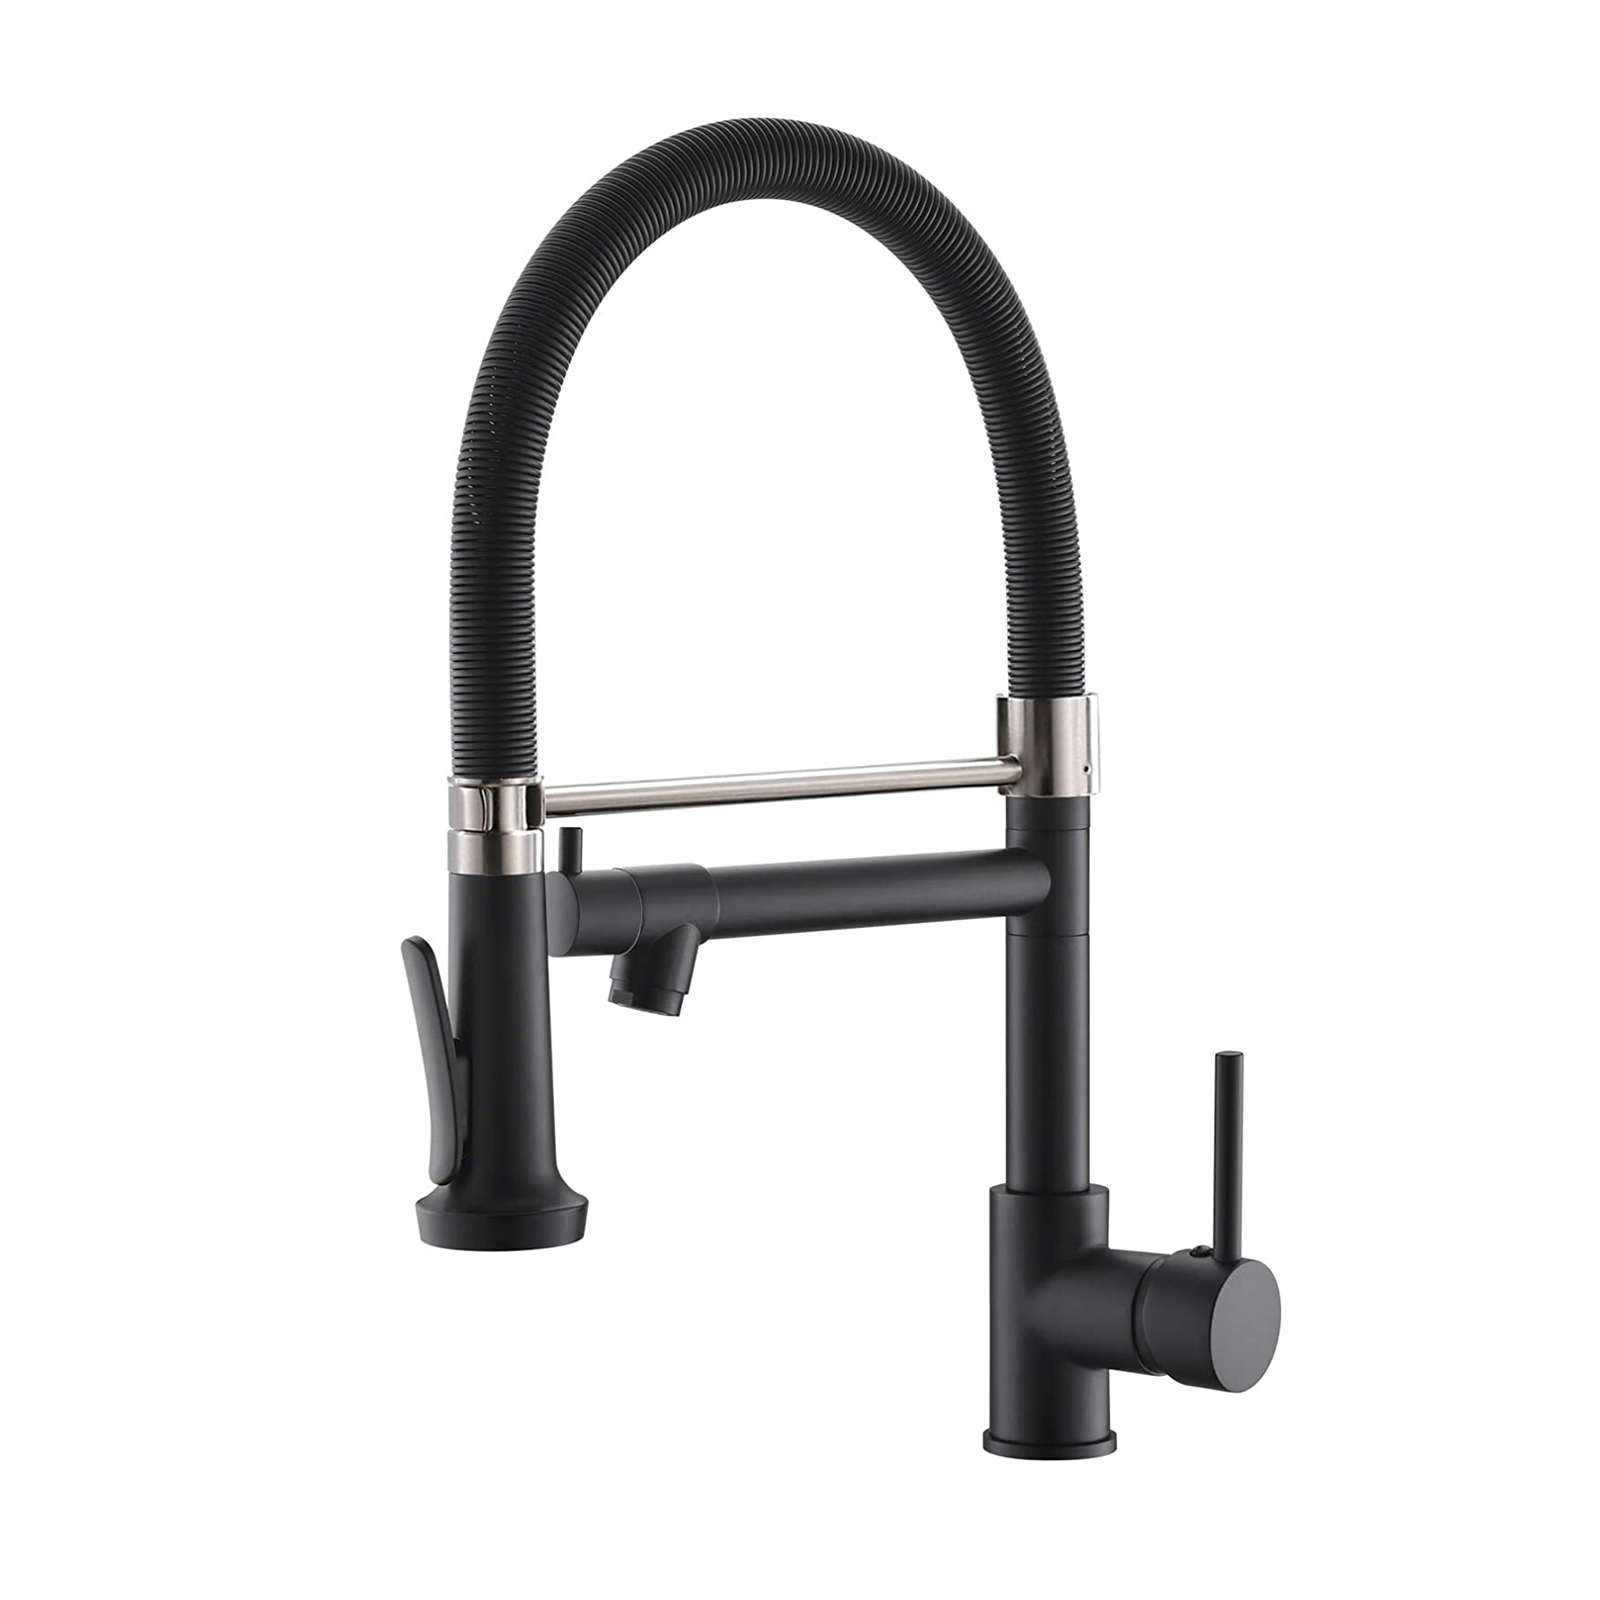 Pull Down Kitchen Faucet with Spyraer,FLG Commercial Black Spring Kitchen Sink Faucet with Brushed Nickel